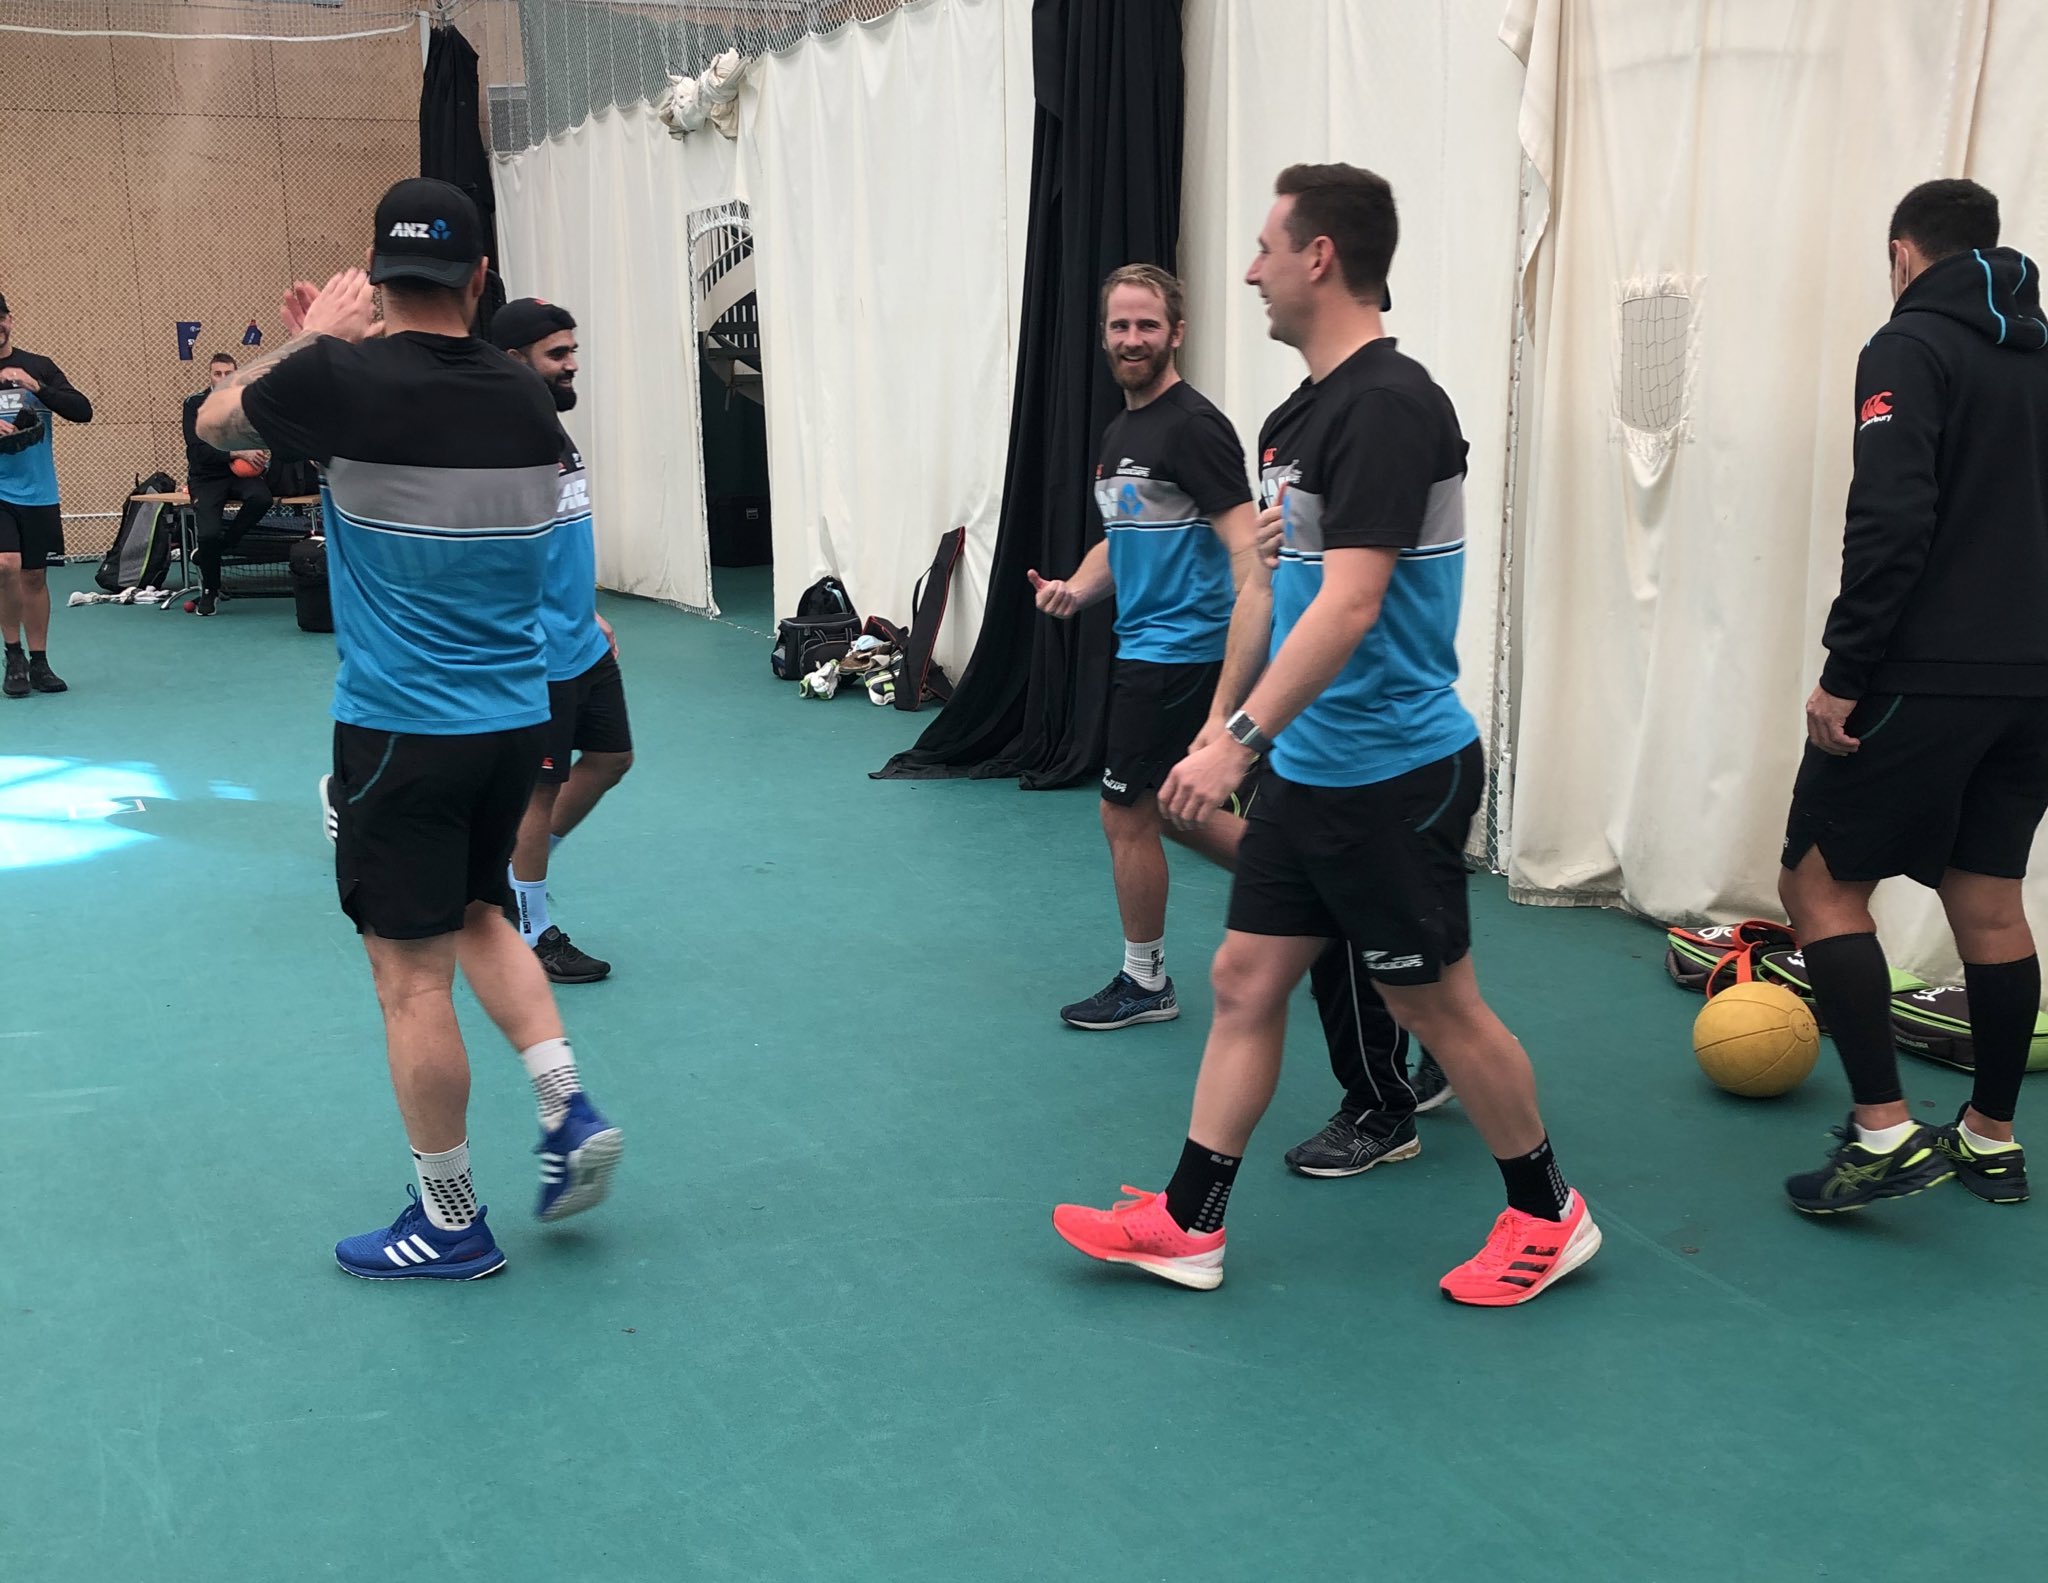 New Zealand players during indoor training session | NZC Twitter